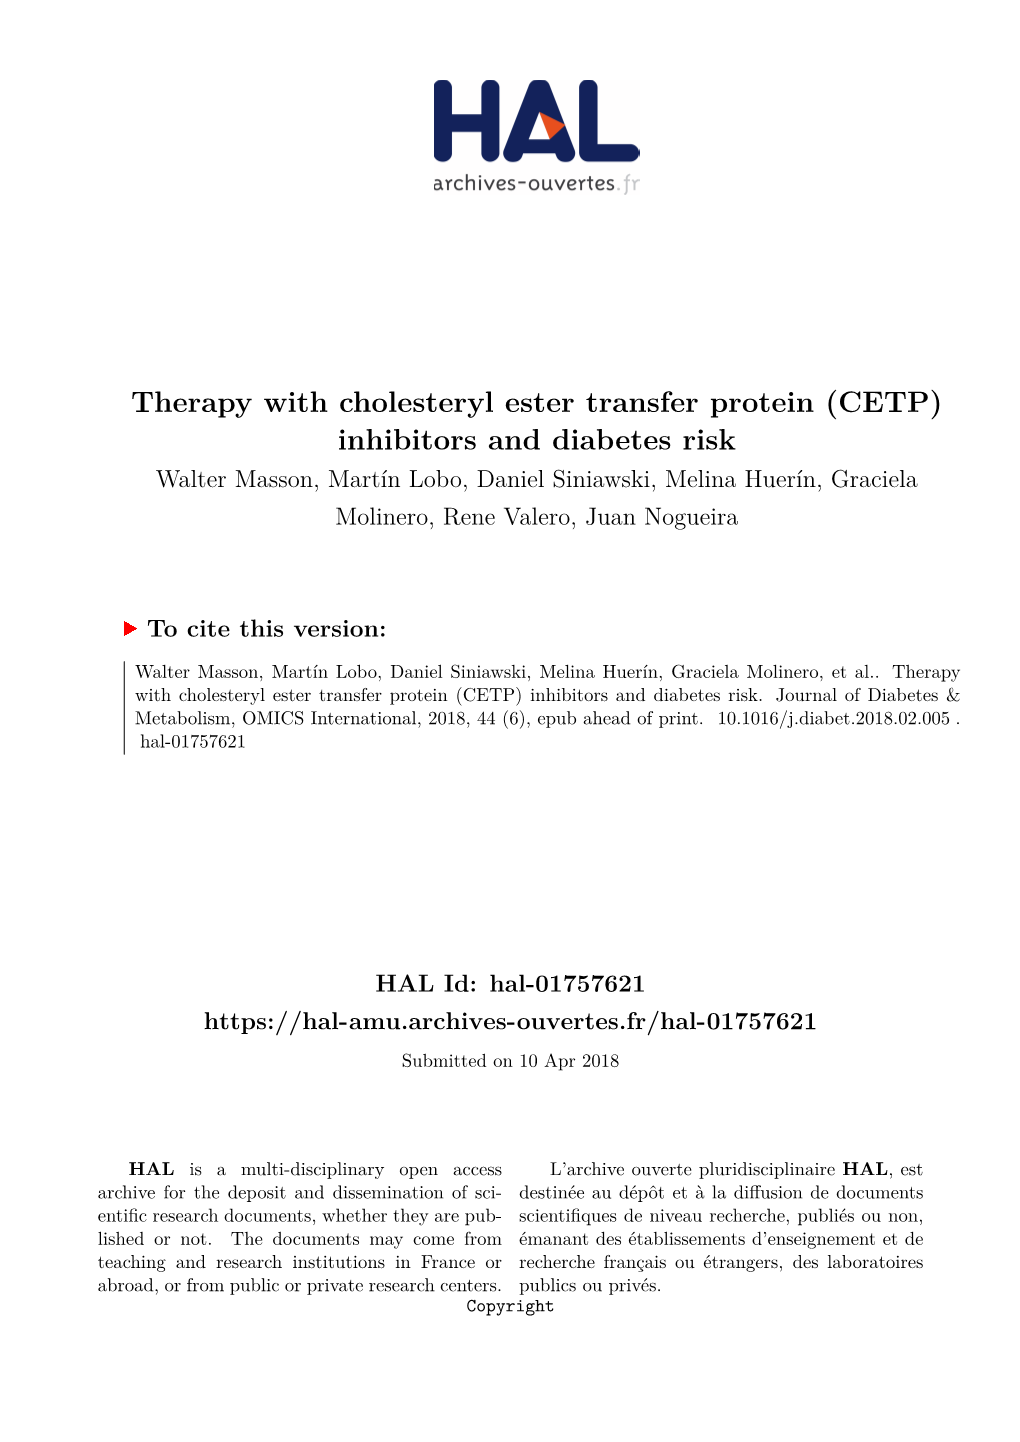 Therapy with Cholesteryl Ester Transfer Protein (CETP) Inhibitors And